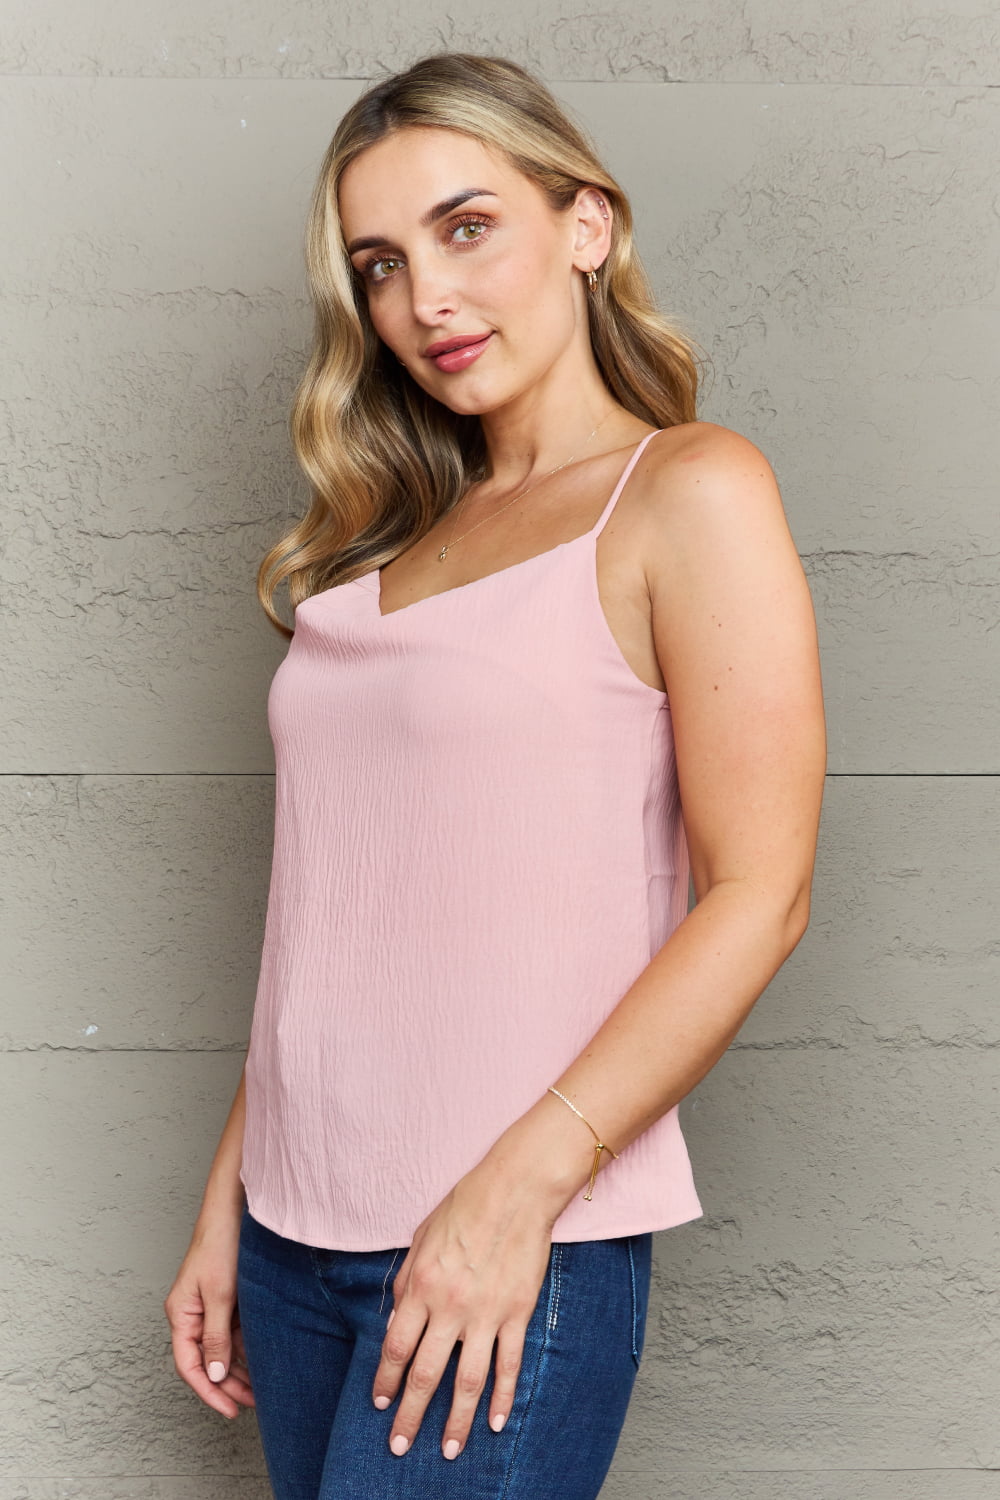 Malibu Dreams Ninexis For The Weekend Loose Fit Cami